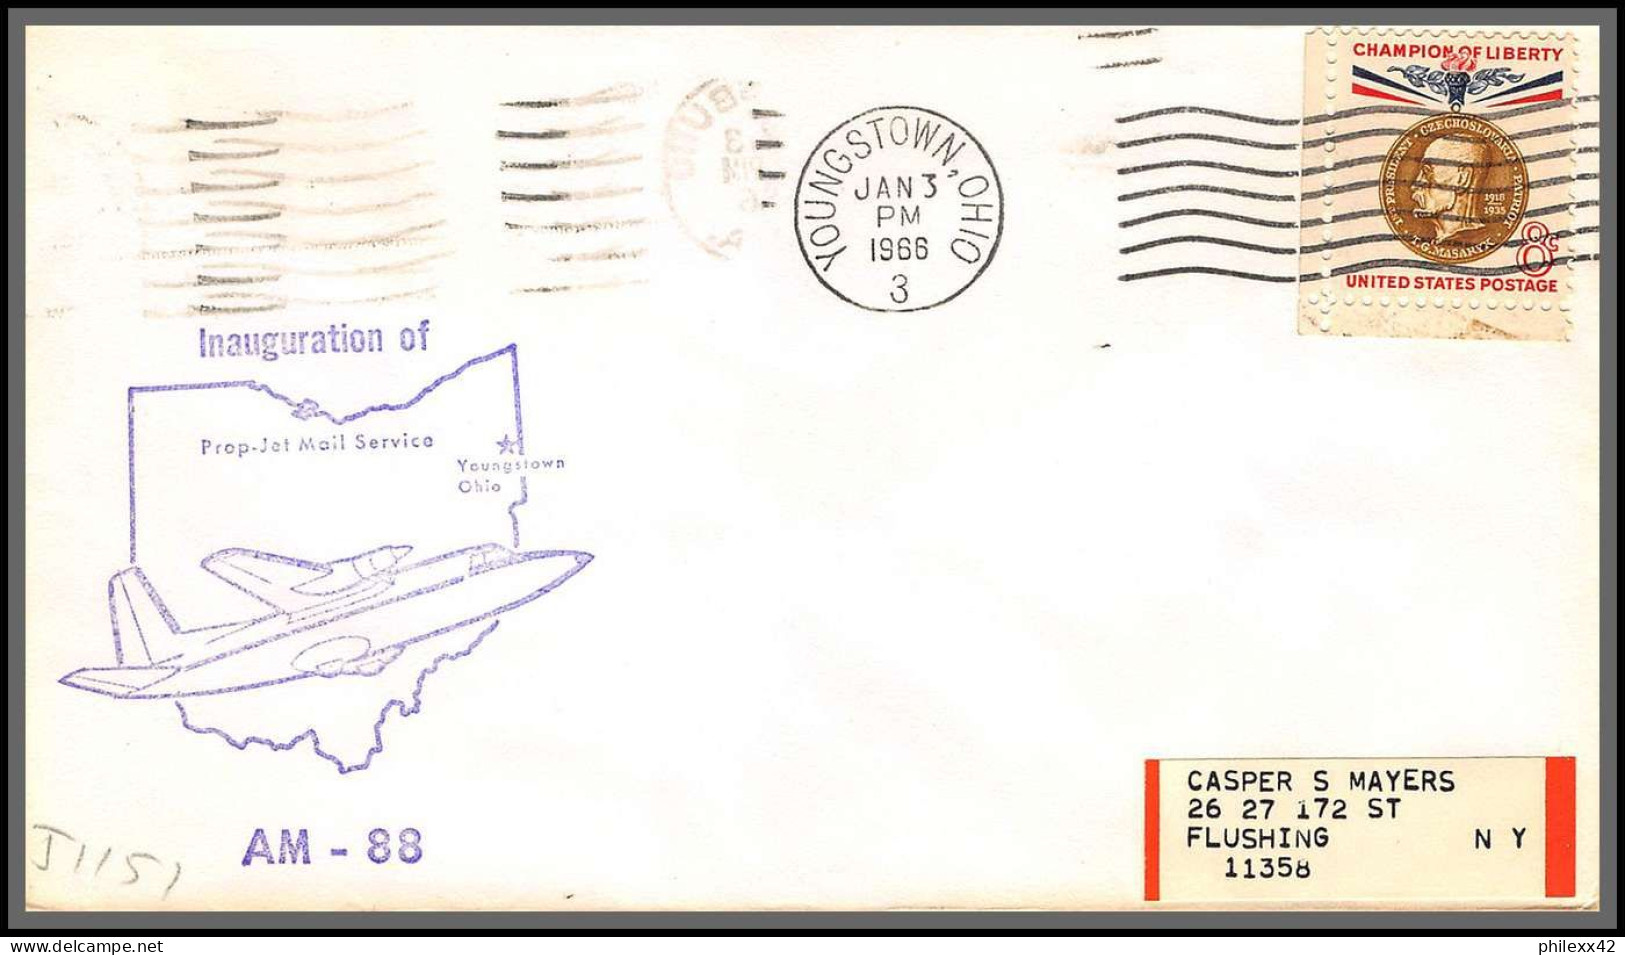 12437 Am 88 Inauguration Prop Jet Mail Service Youngstown 3/1/1966 Premier Vol First Flight Lettre Airmail Cover Usa  - 3c. 1961-... Briefe U. Dokumente